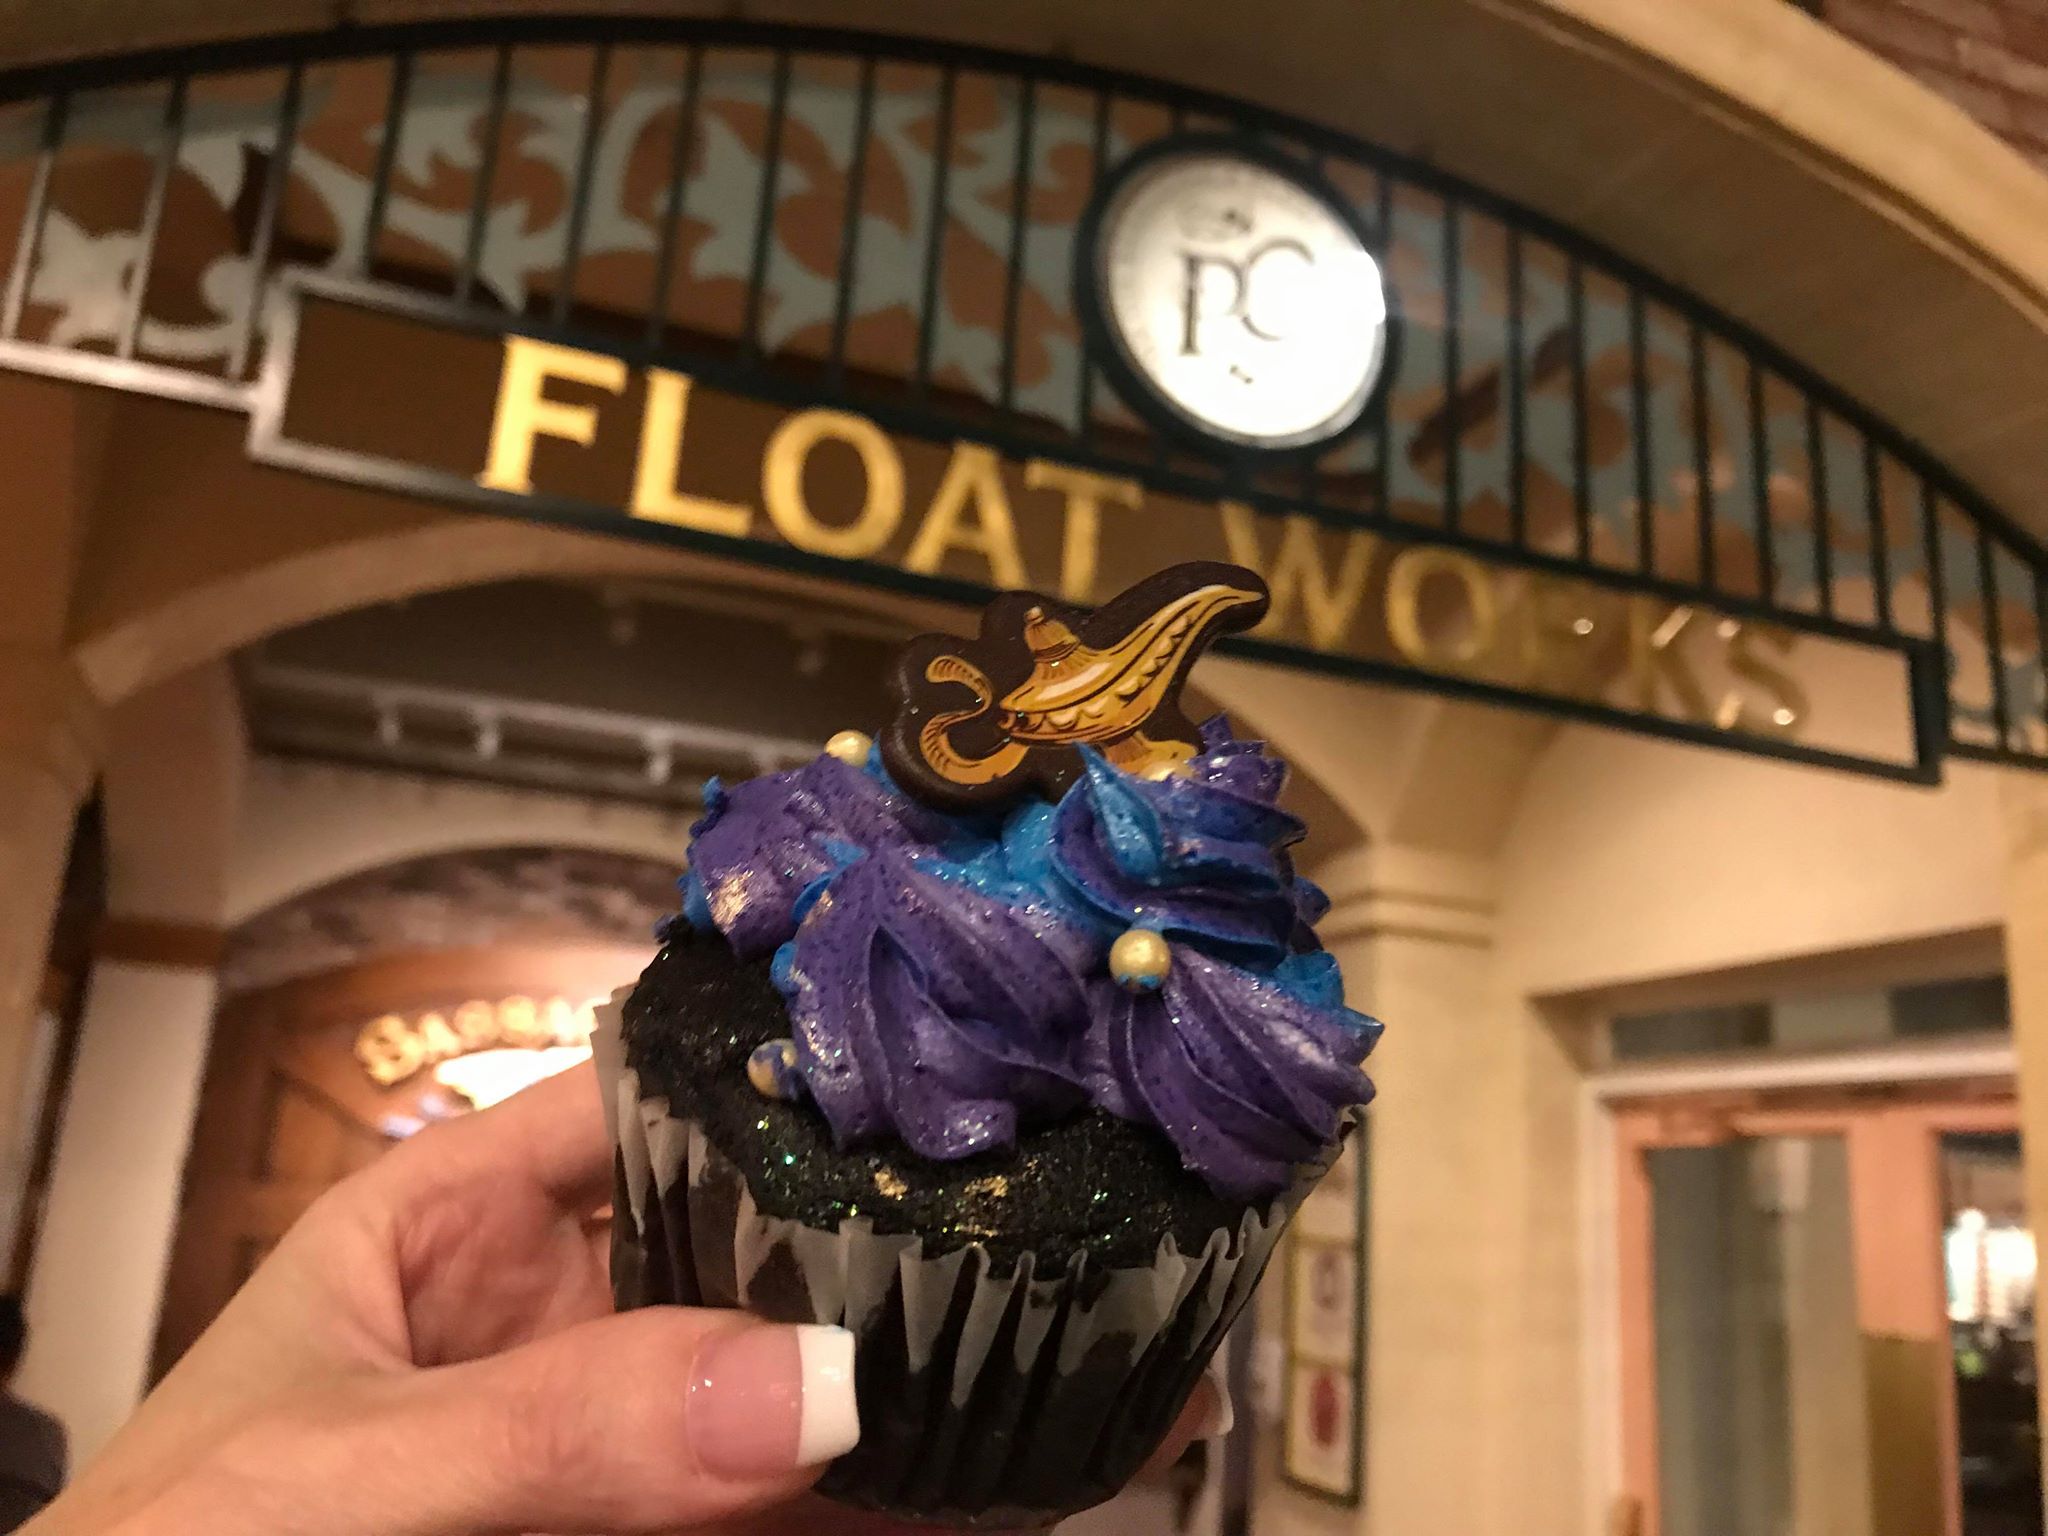 Arabian Nights Cupcake has landed at Port Orleans French Quarter